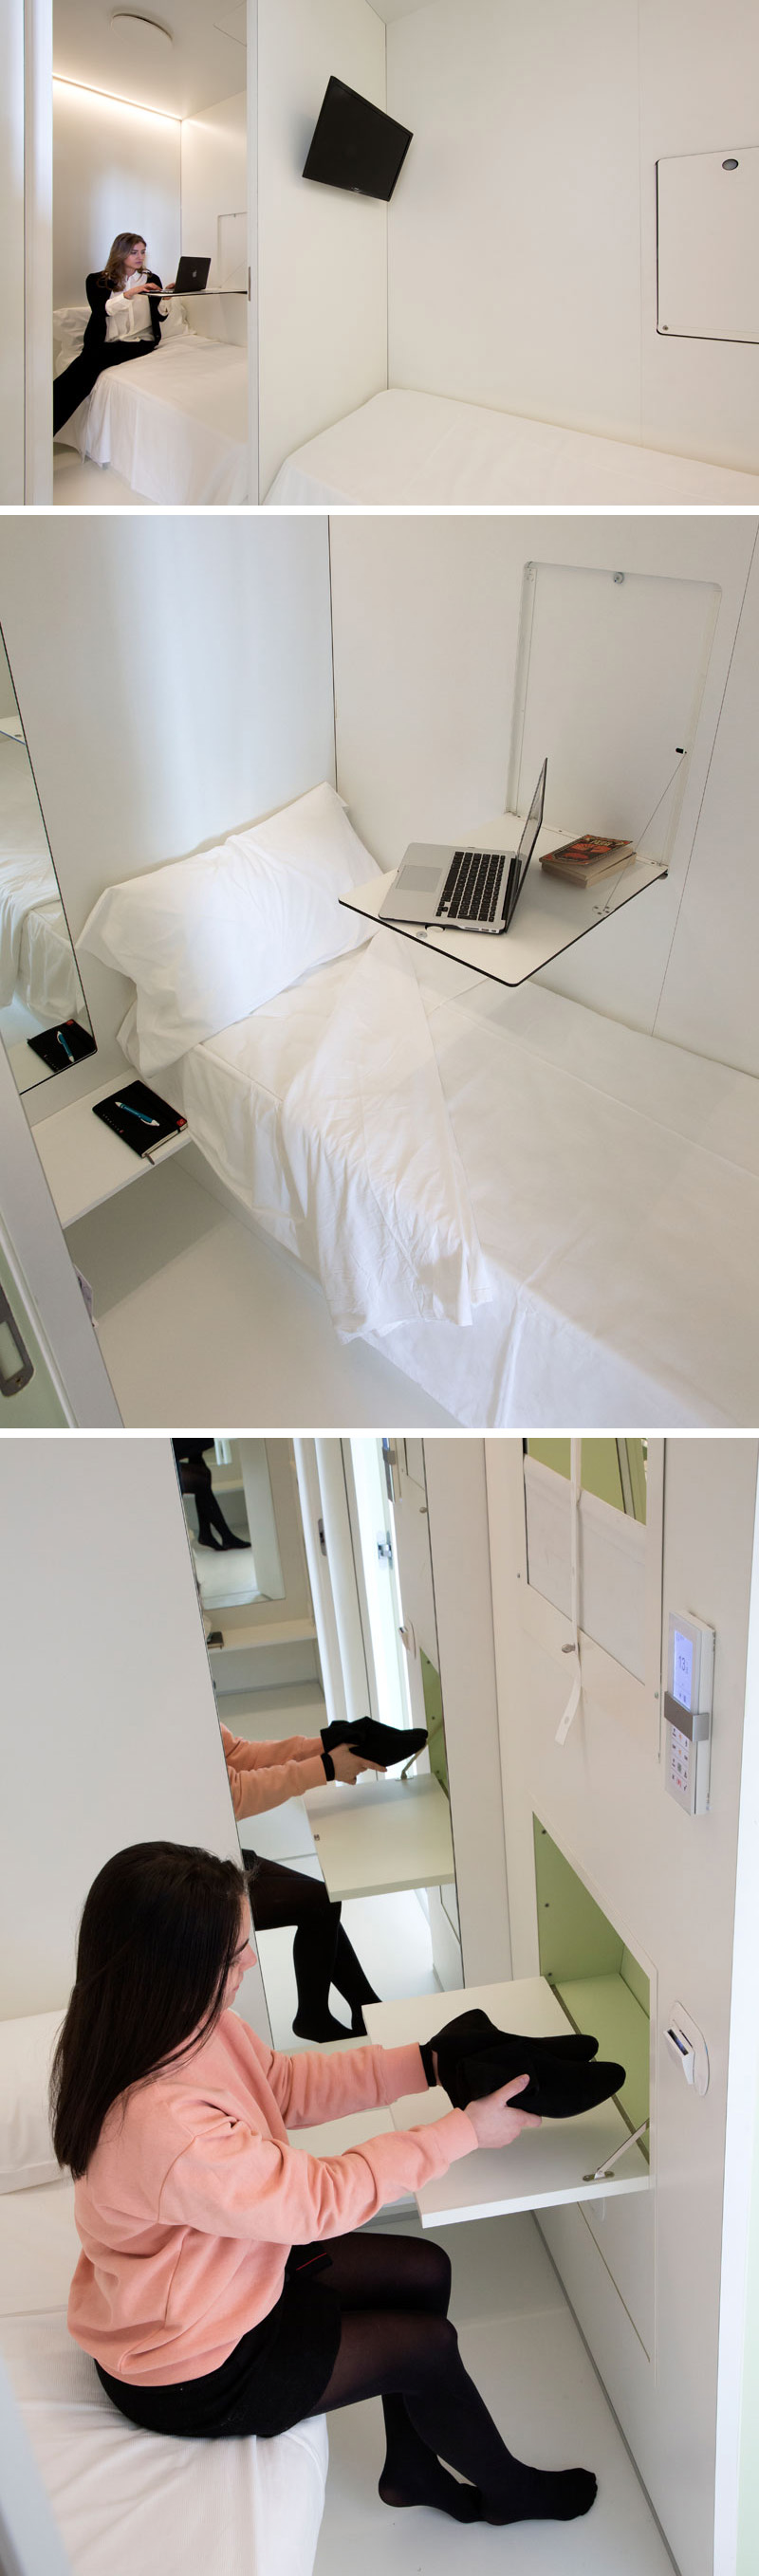 The capsule hotel rooms inside BenBo in Naples, Italy, are just 4 square meters and have soundproof walls, an automatic door, a window with blinds, a drop down table/desk, a television, a mirror, hangers, and a shoe storage compartment.